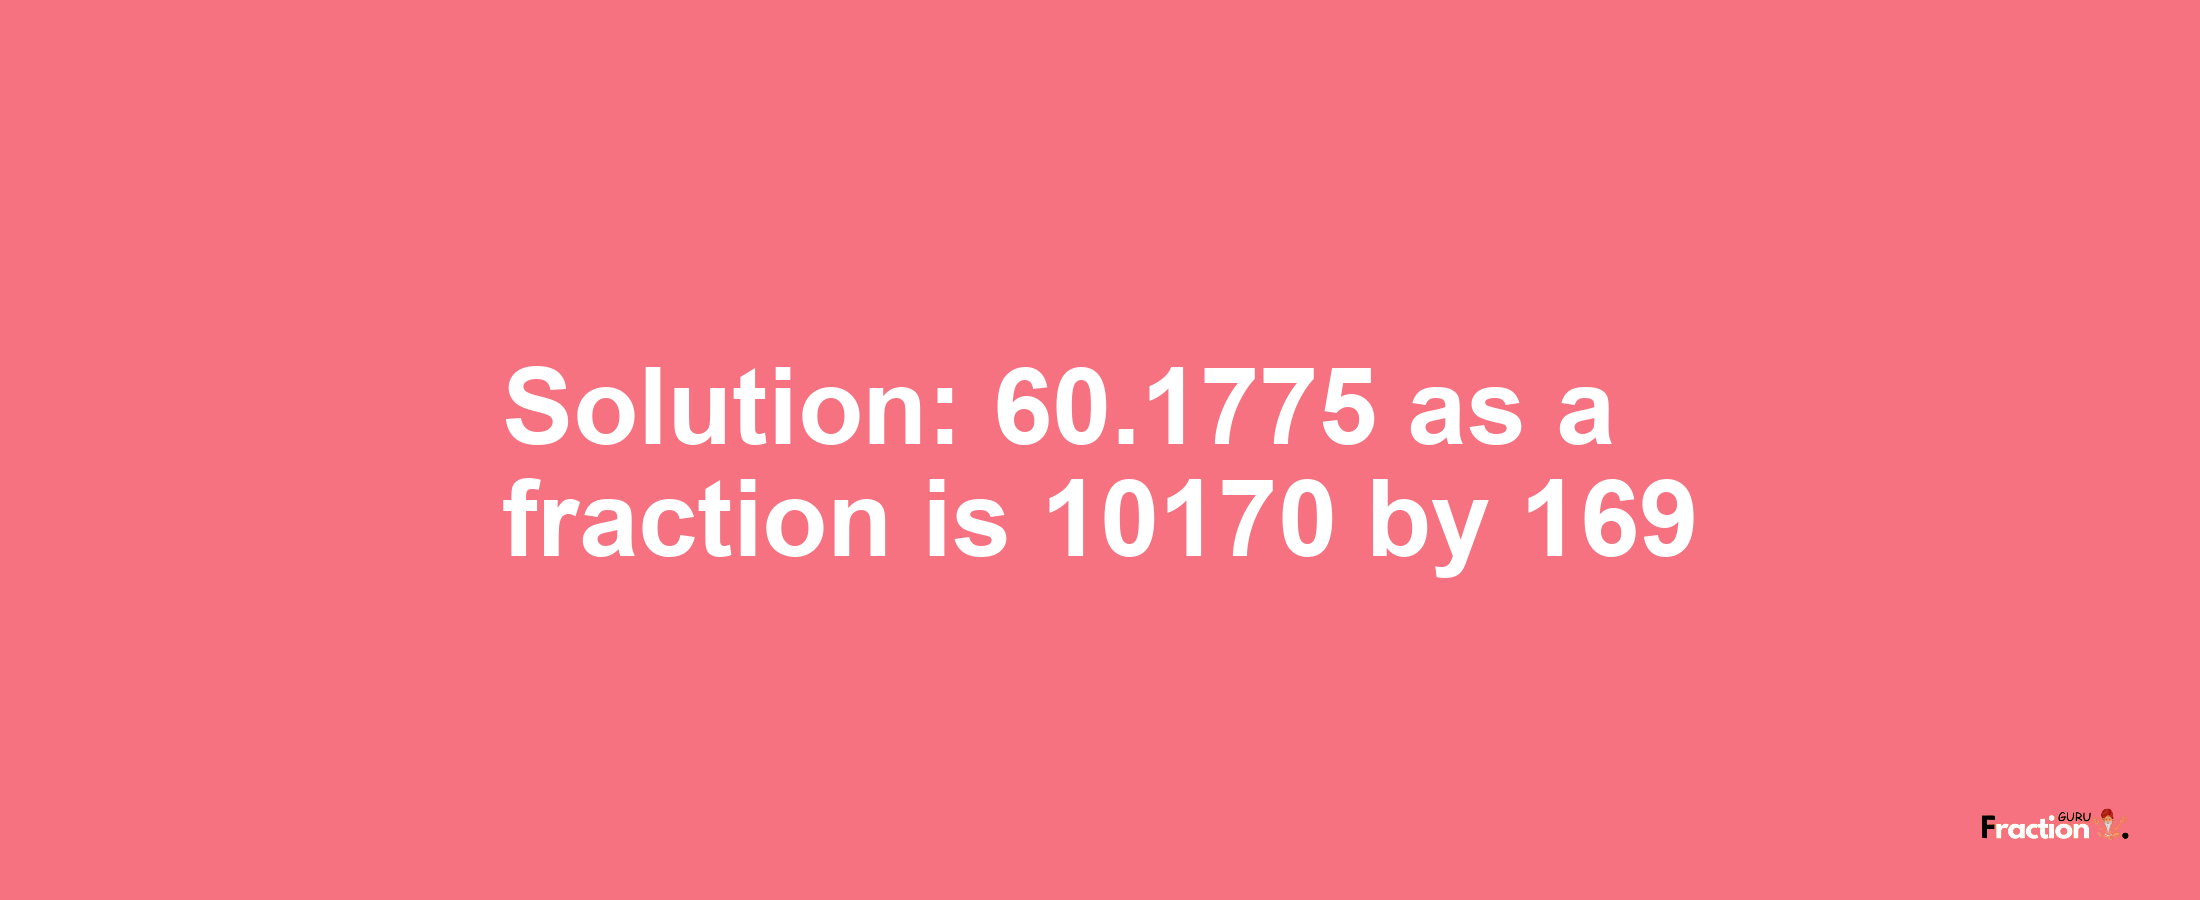 Solution:60.1775 as a fraction is 10170/169